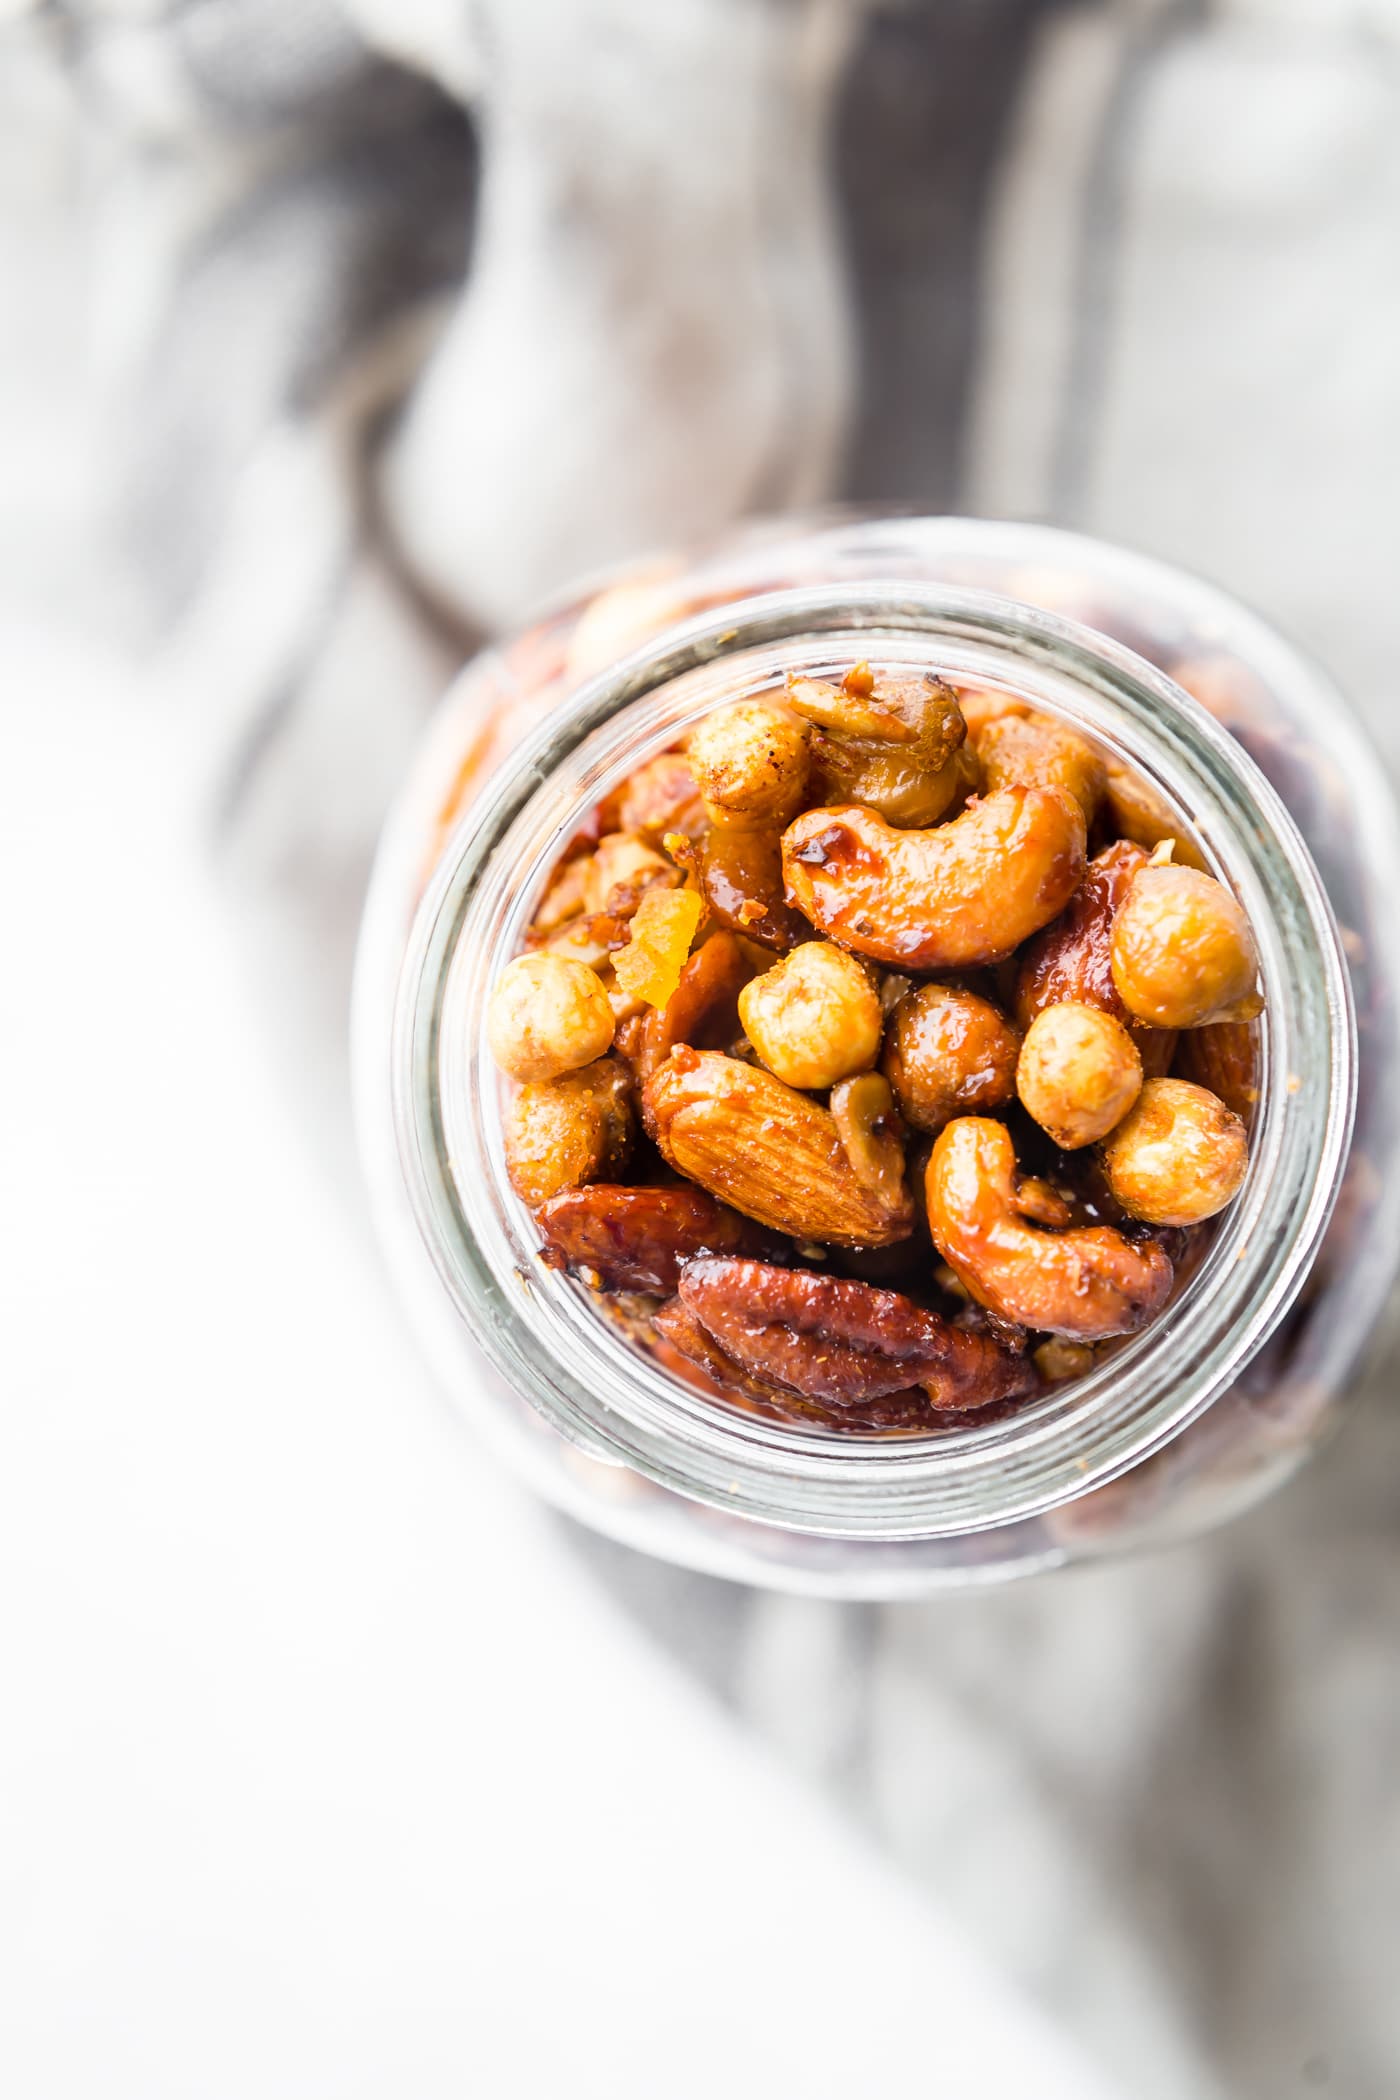 Spicy candied cajun trail mix made easy in the instant pot! What's not to love? This candied cajun trail mix is the perfect quick and healthy snack and total crowd pleaser. Cajun Spices, maple syrup, nuts, seeds, and chickpeas all cooked together then mixed with dried mango for a sweet touch. It's vegan friendly and naturally grain free!